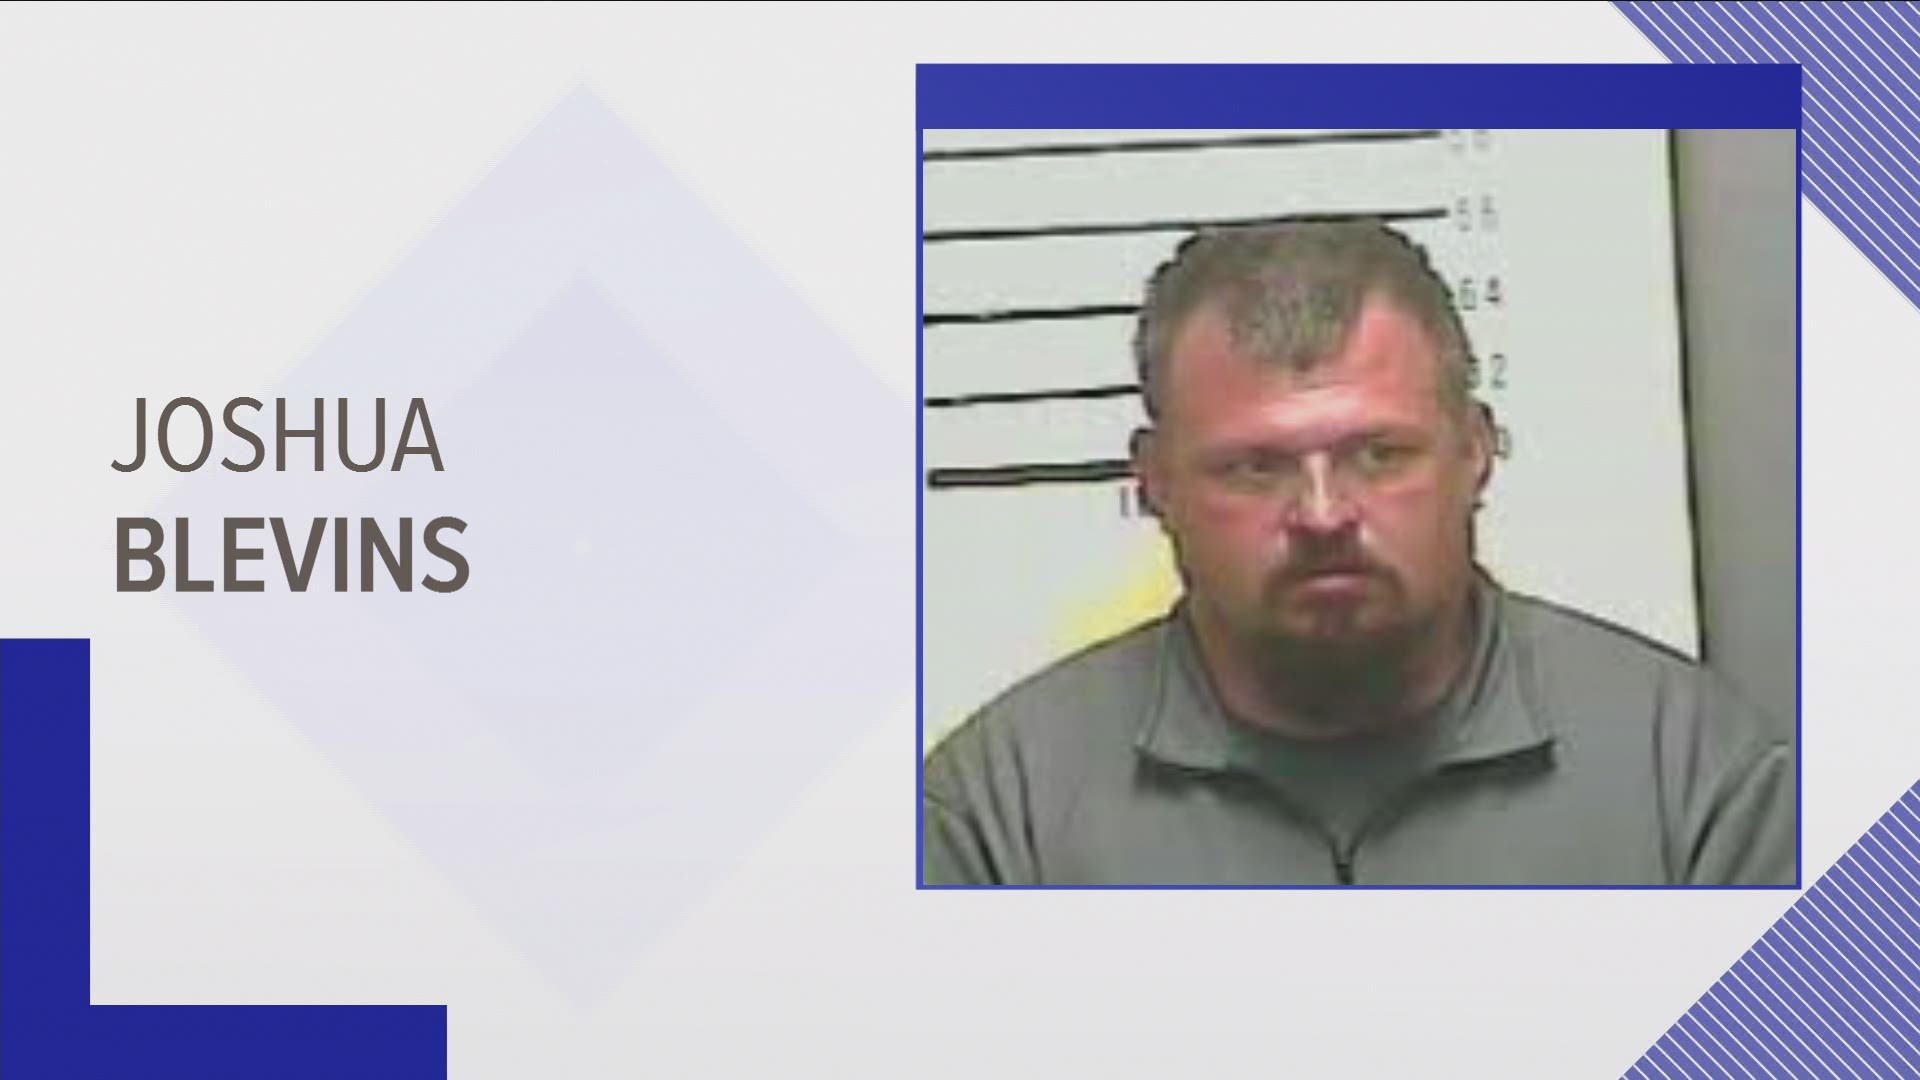 A Kentucky man is charged with torturing an animal after a Bell County Sheriff's deputy found a severely malnourished dog in his home.